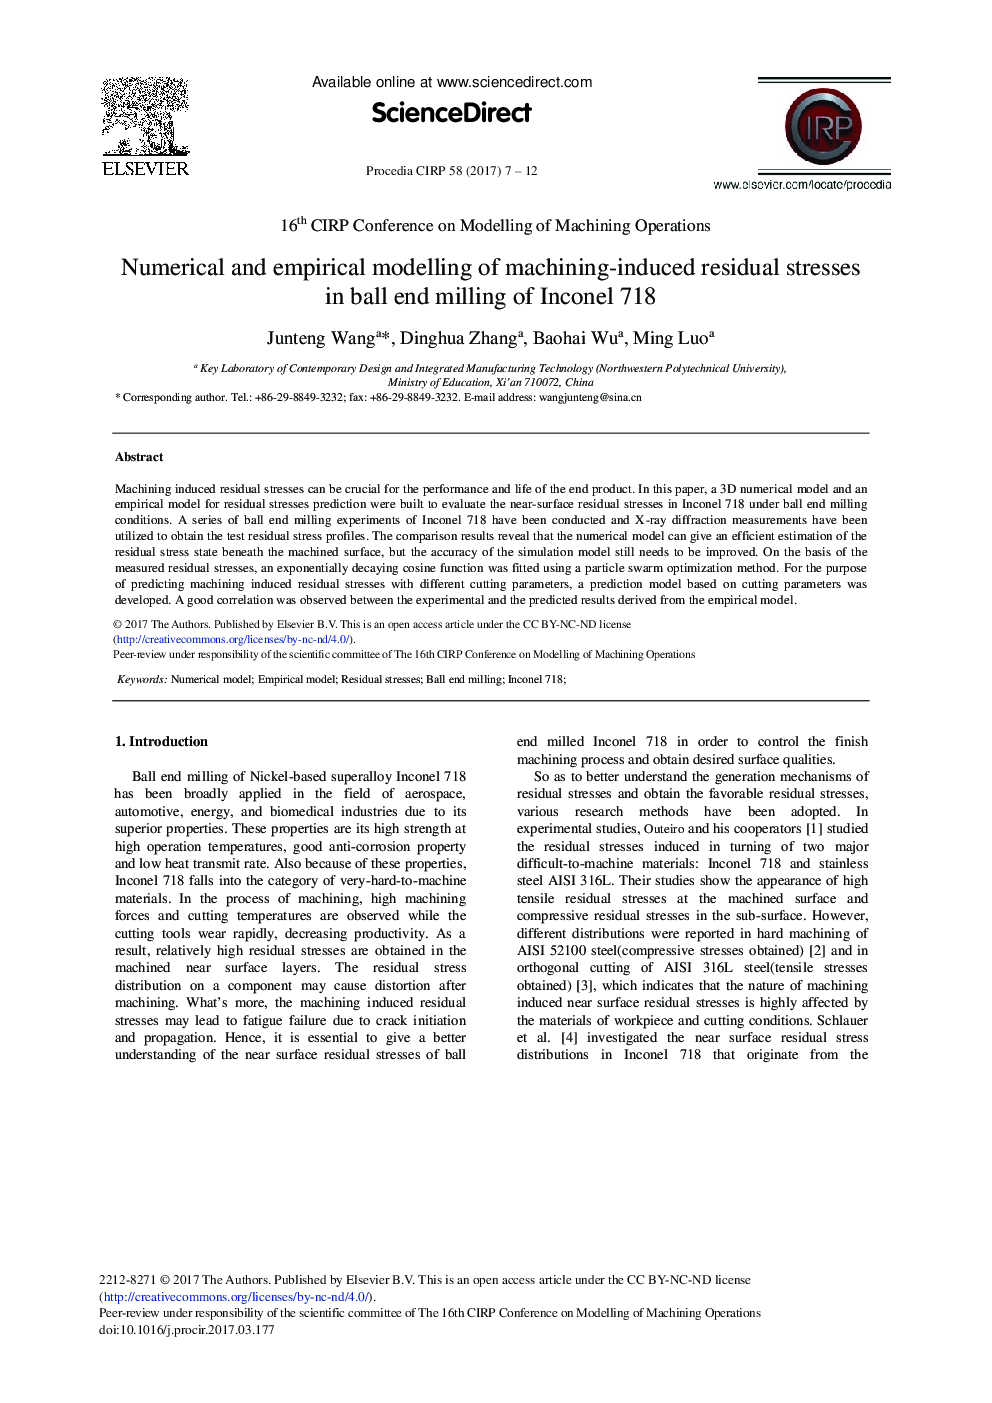 Numerical and Empirical Modelling of Machining-induced Residual Stresses in Ball end Milling of Inconel 718